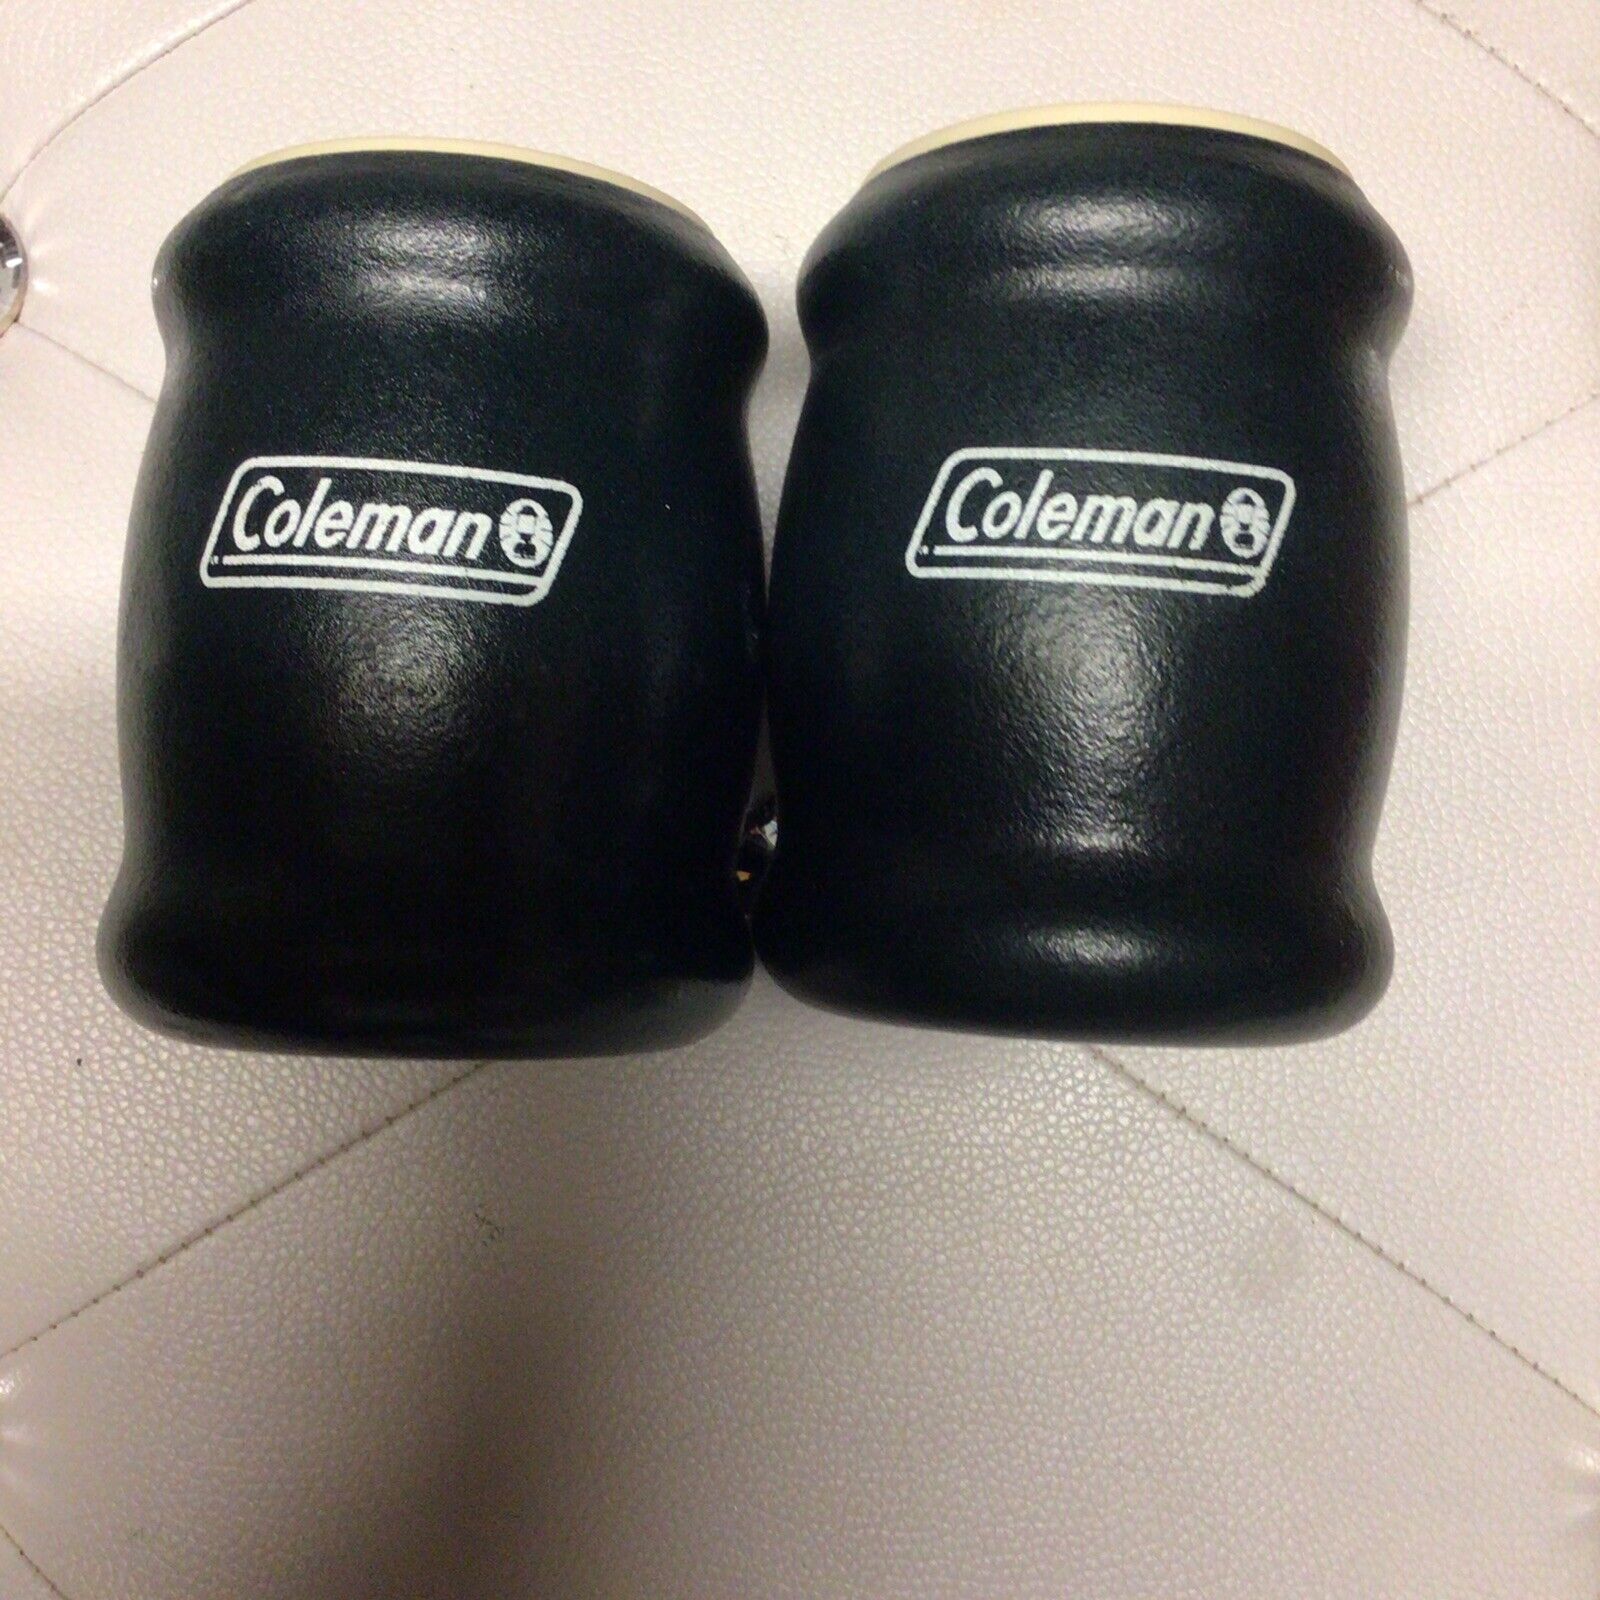 2 Vintage Coleman Insulated Soda Can Coozie Koozie Black Dad Boat